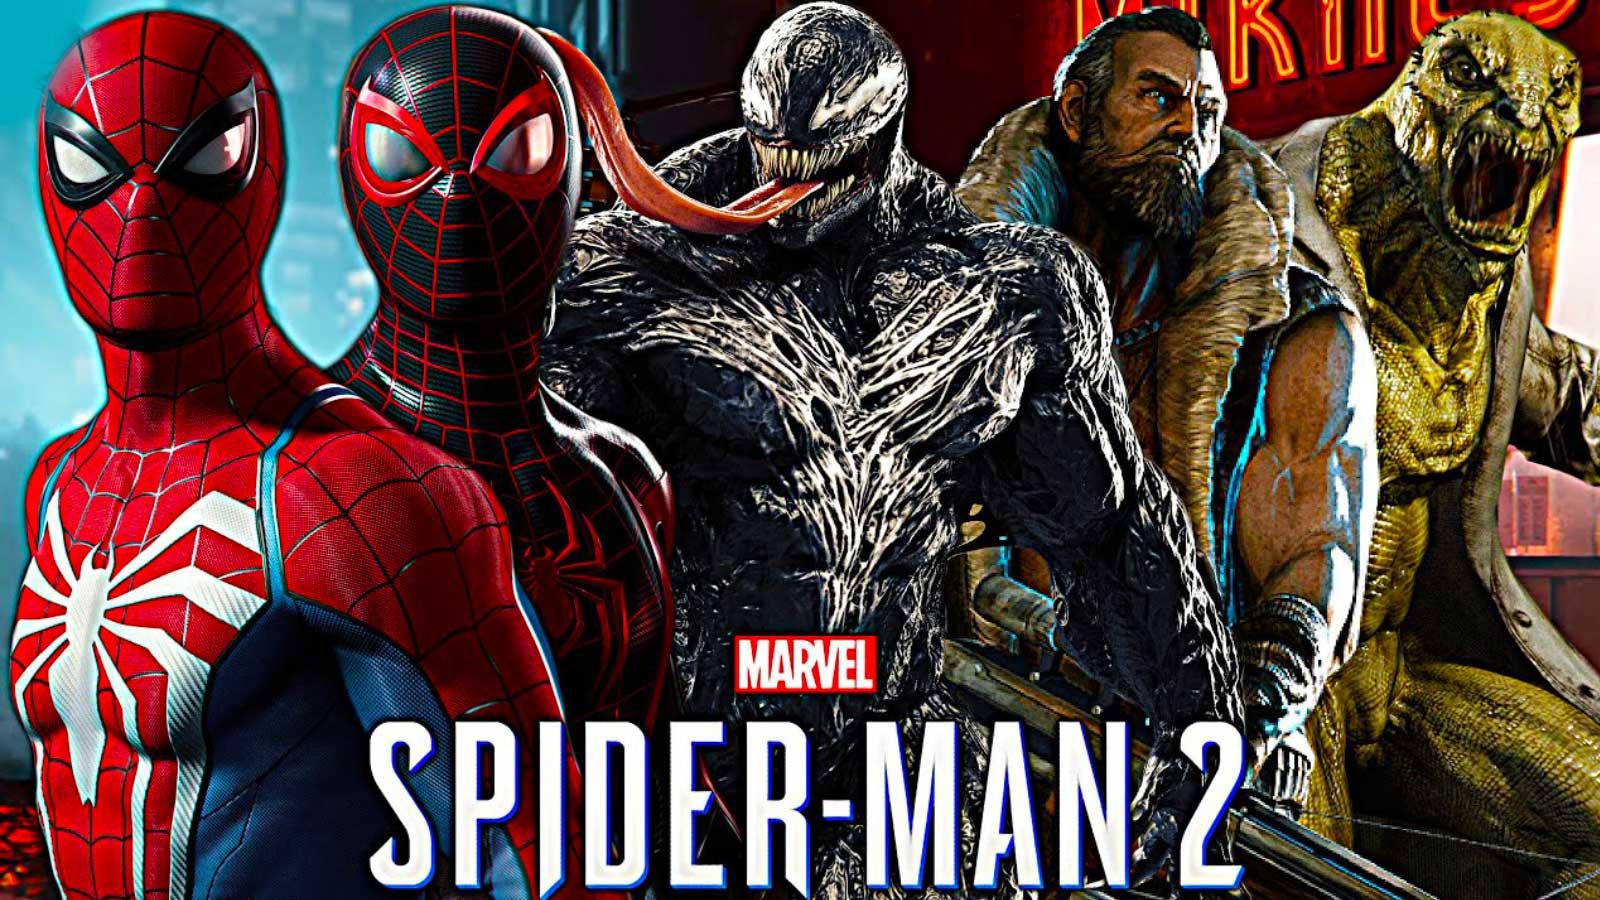 Spiderman 2 characters Peter Parker and Miles Morales with Venom and other characters